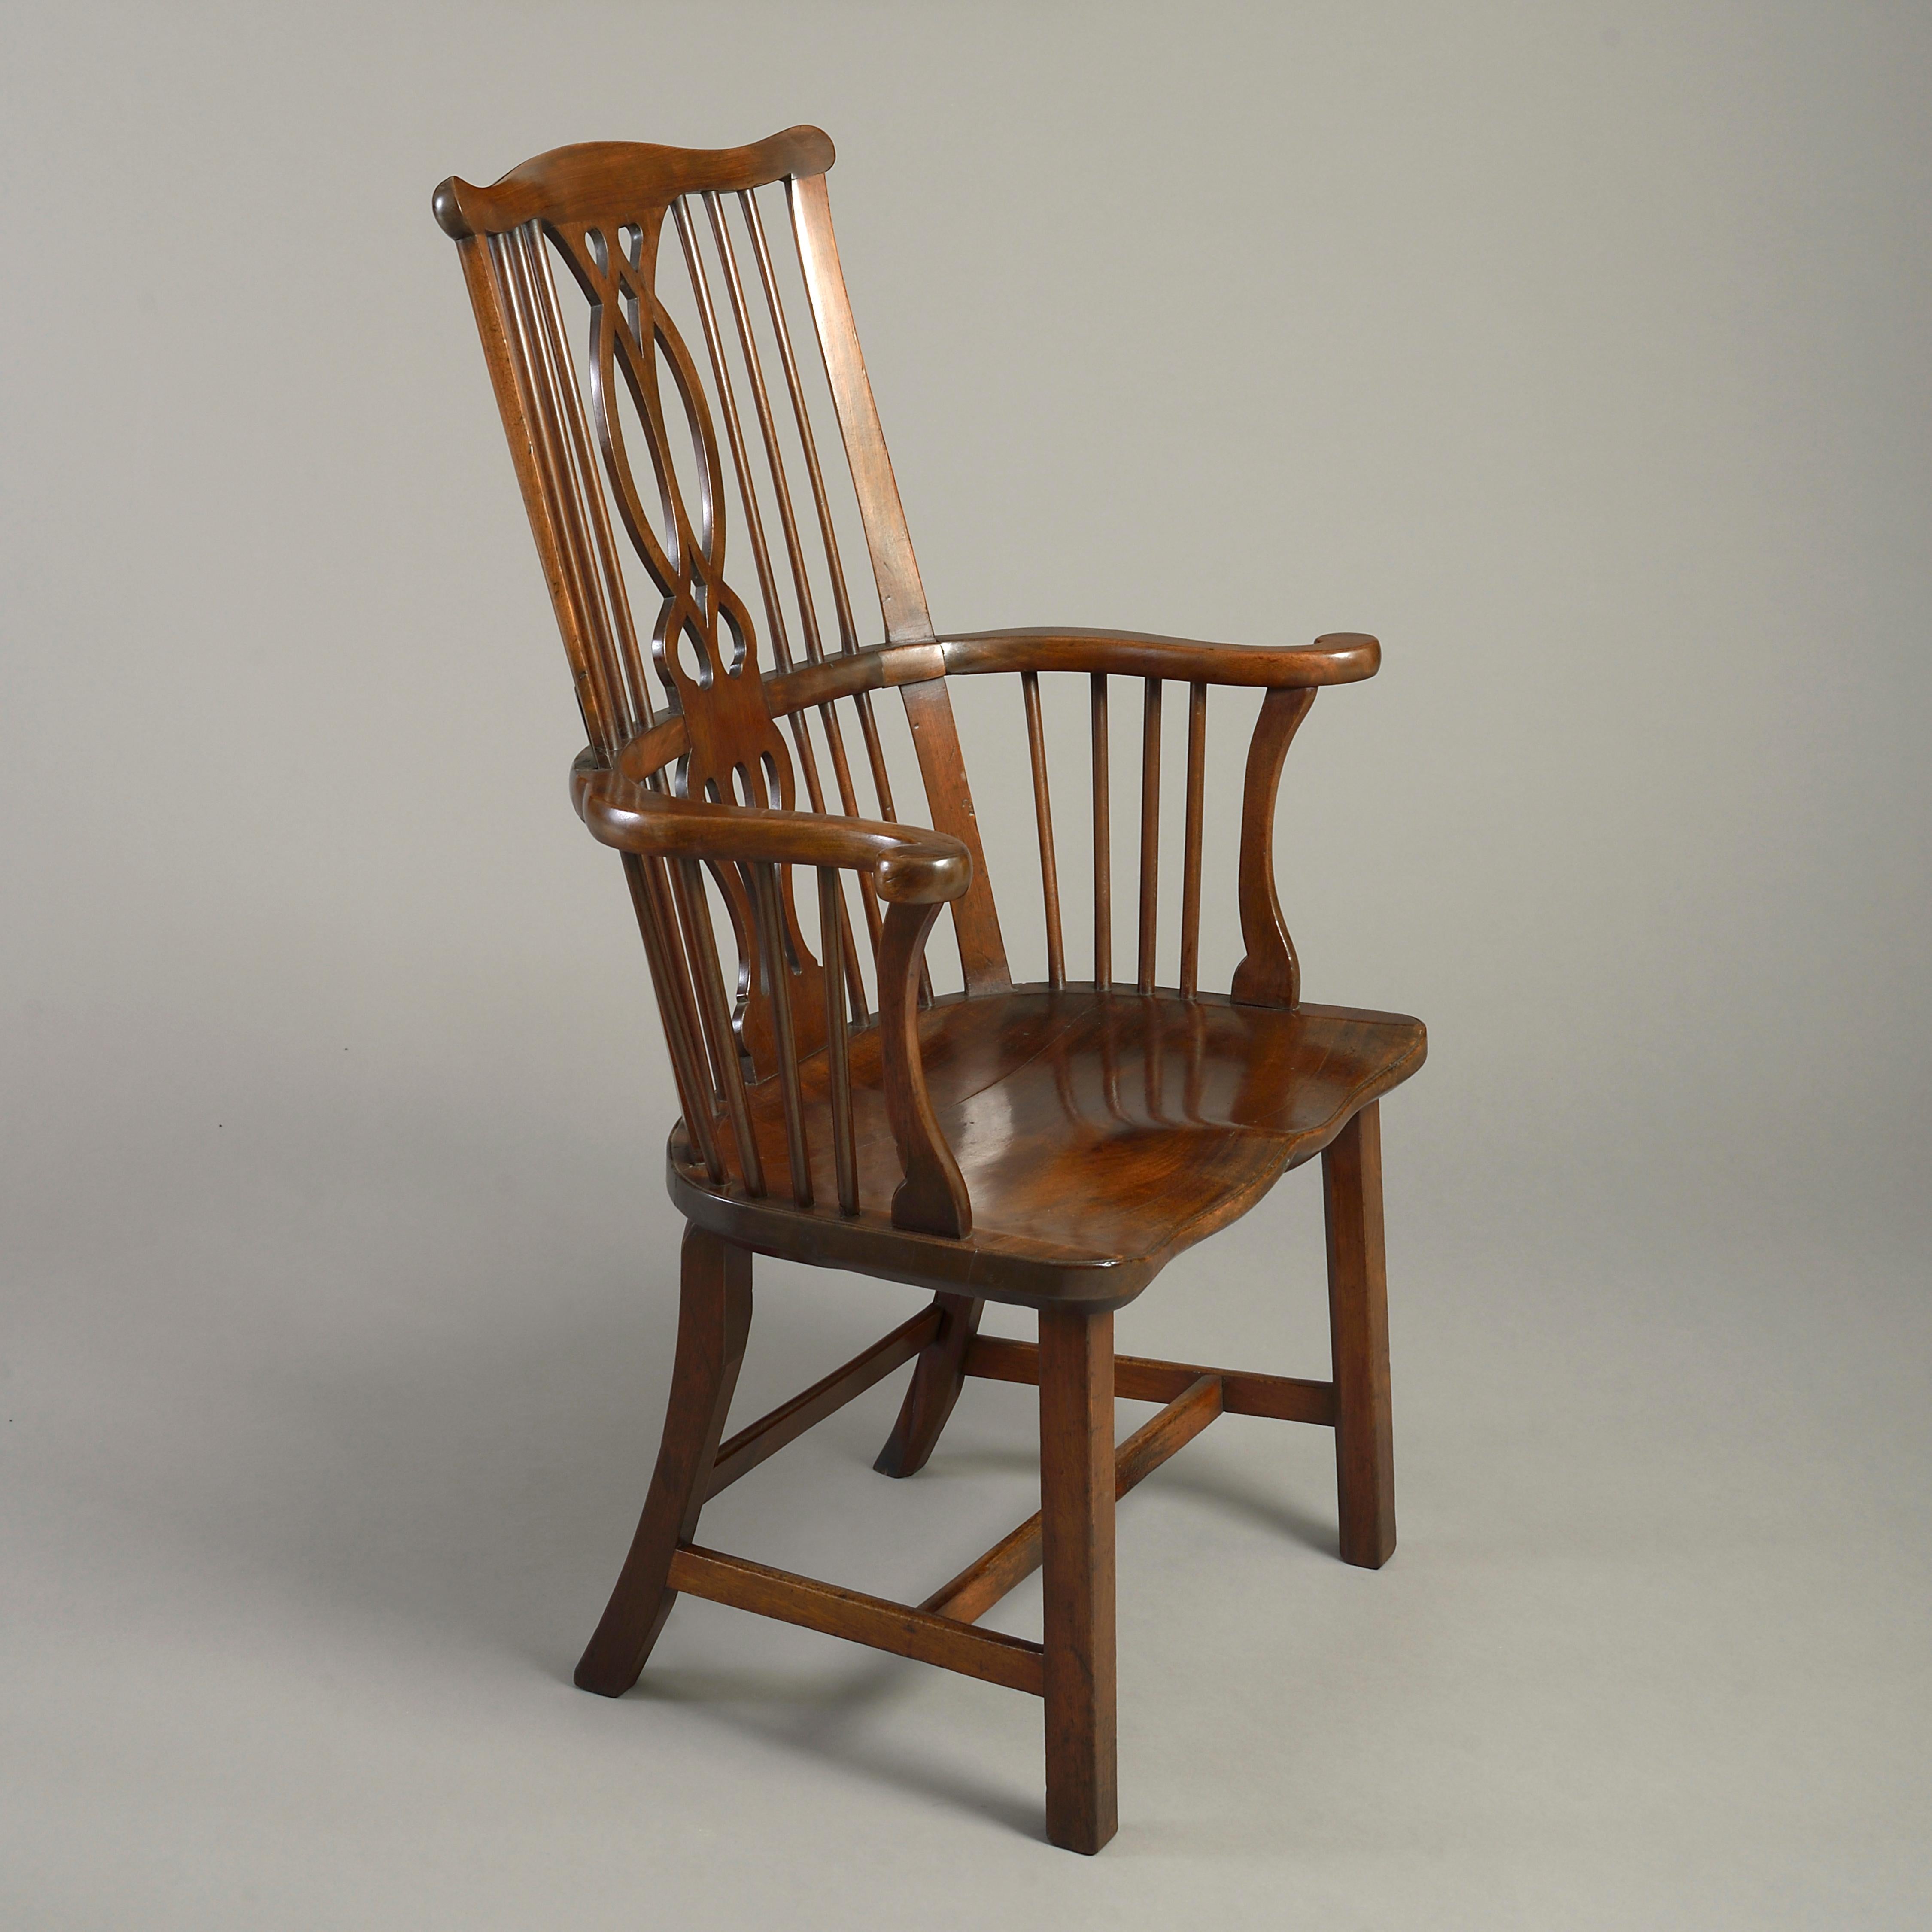 A George III mahogany Windsor armchair with pierced splat and saddle seat, circa 1775.